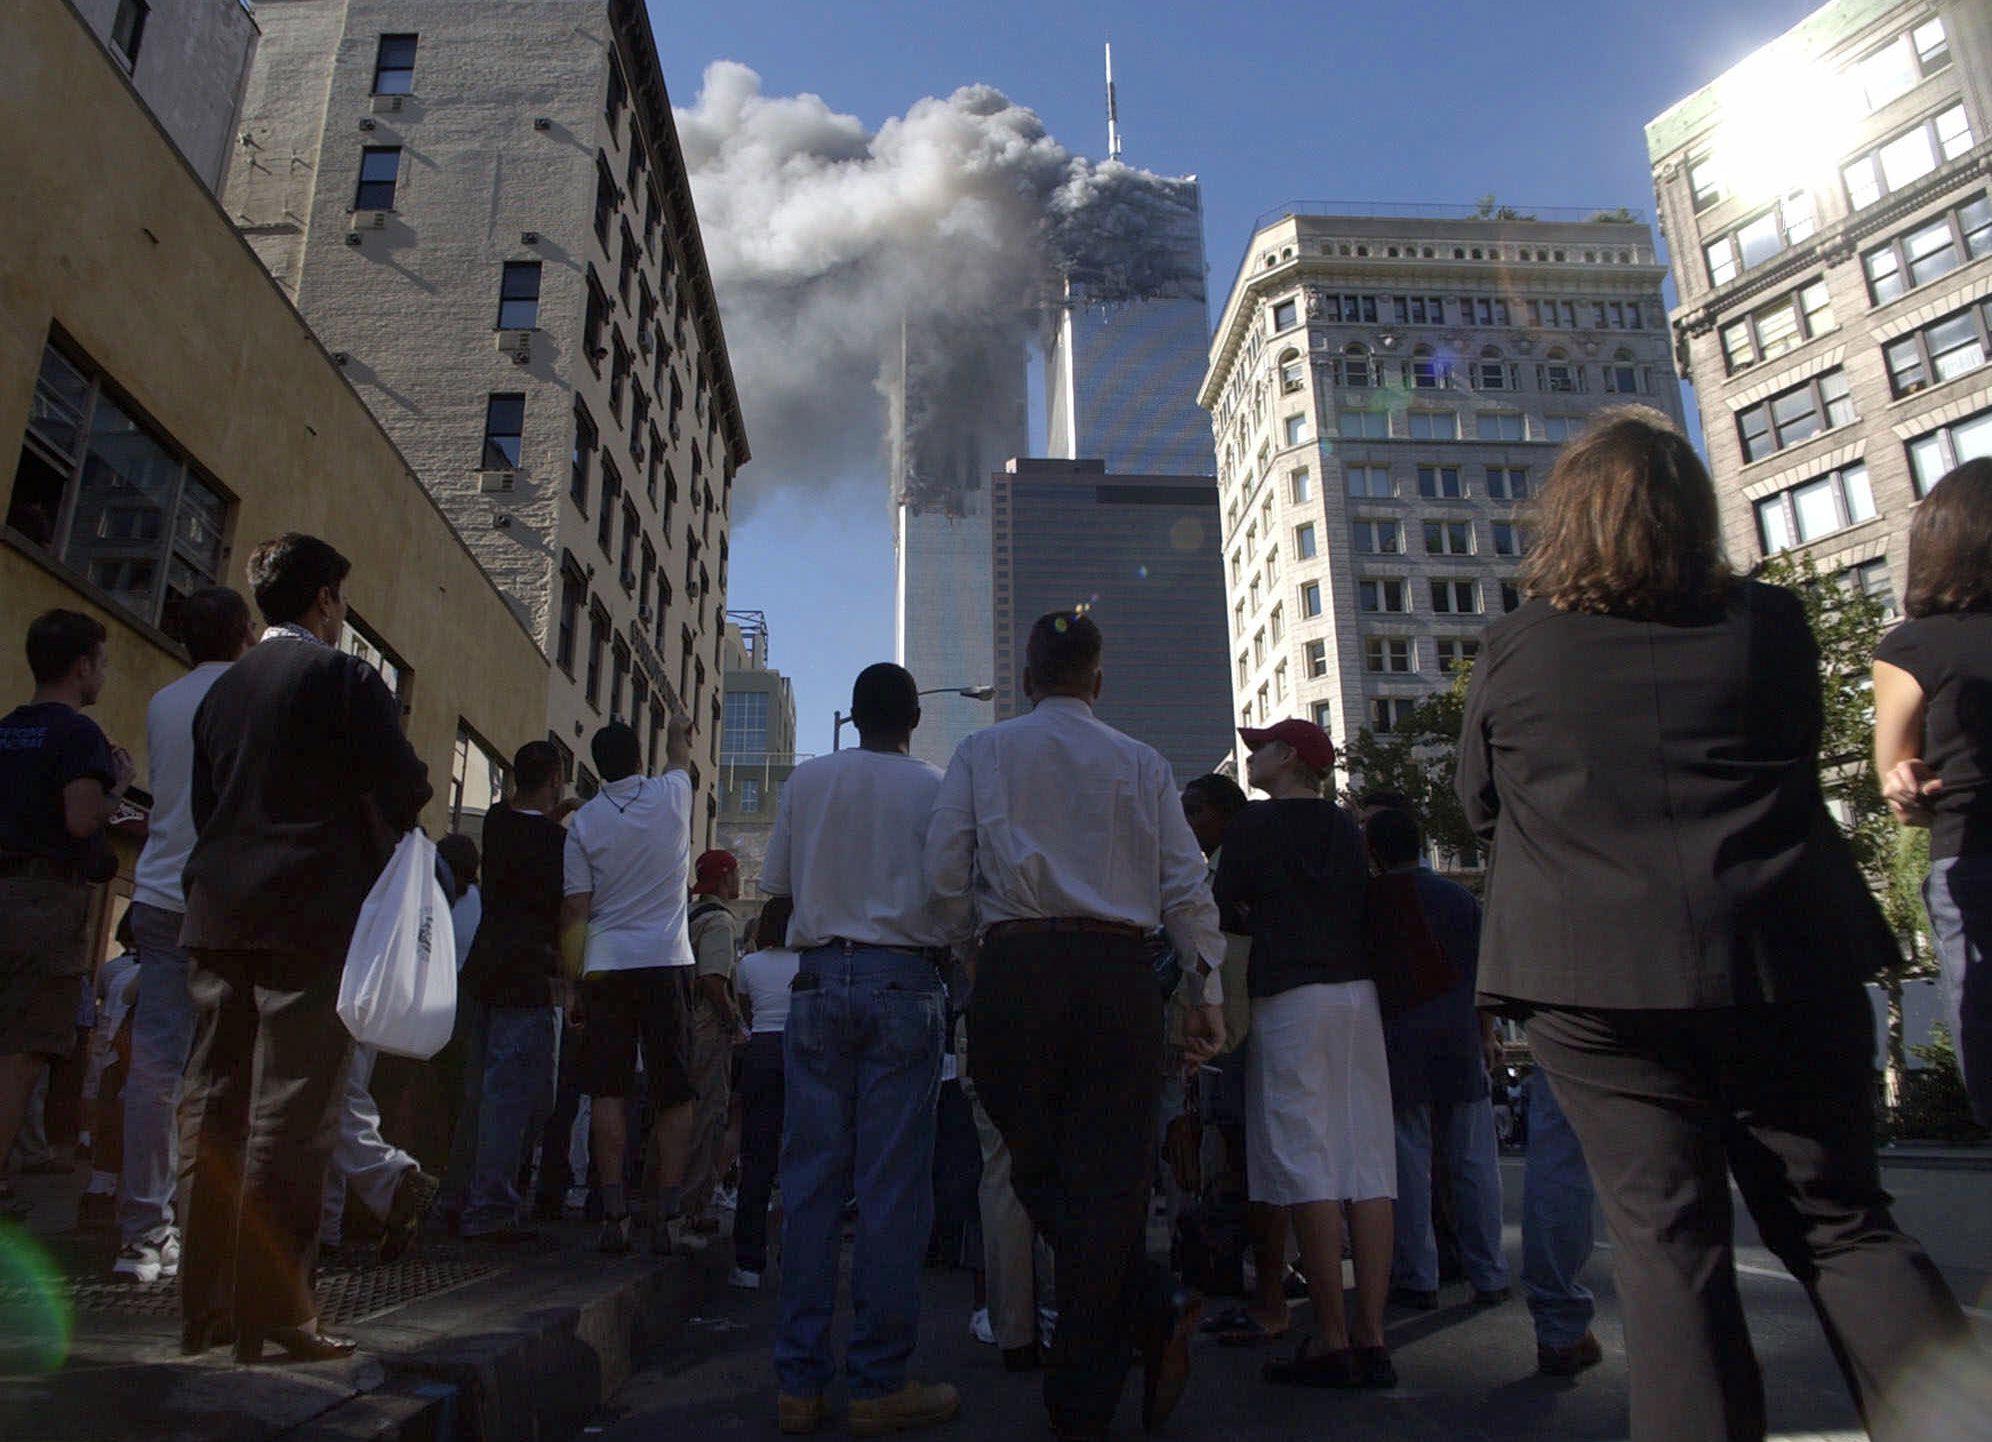 AP PHOTOS: 20 images that documented the enormity of 9/11